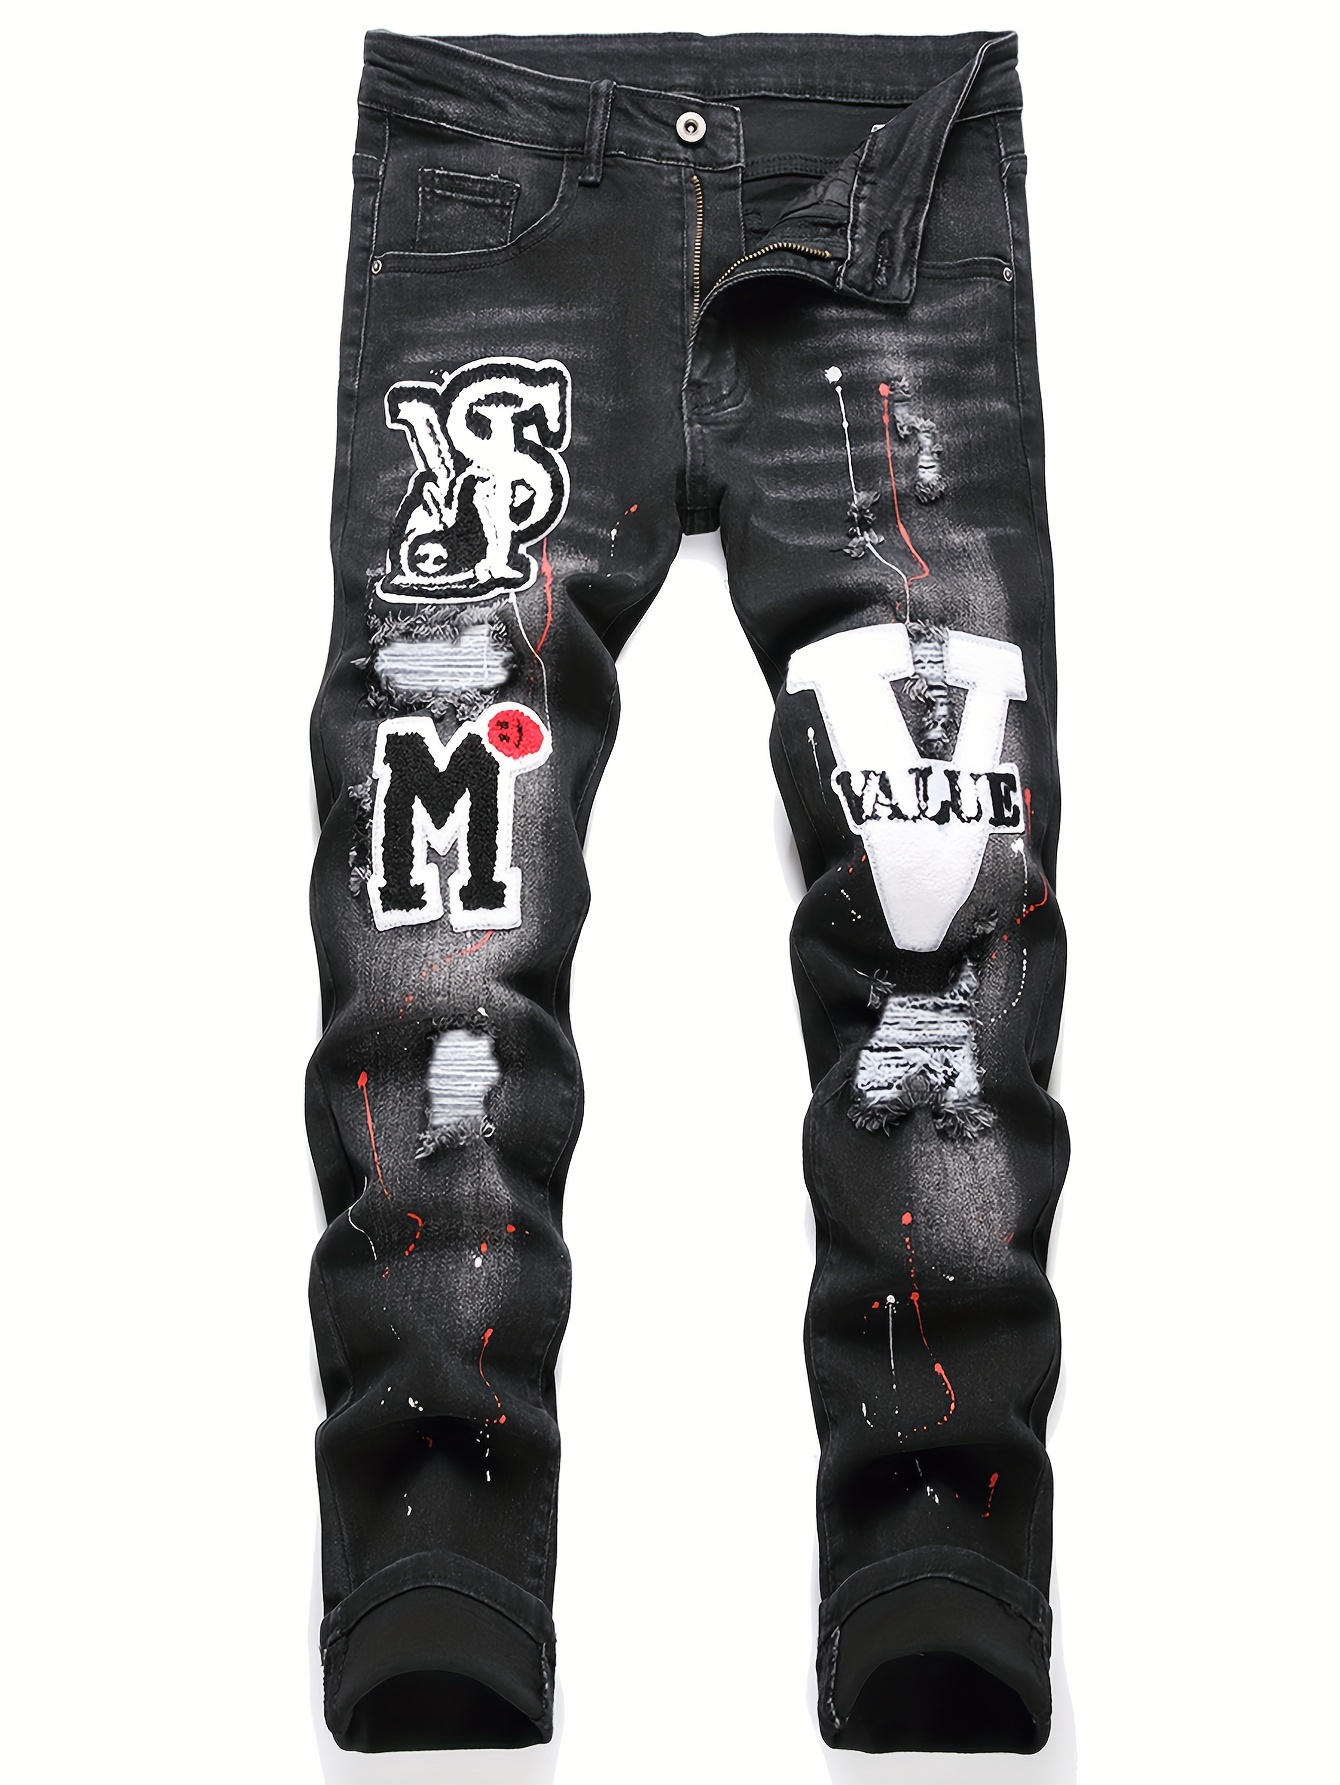  Men's Jeans Men Letter Patched Ripped Jeans Jeans for